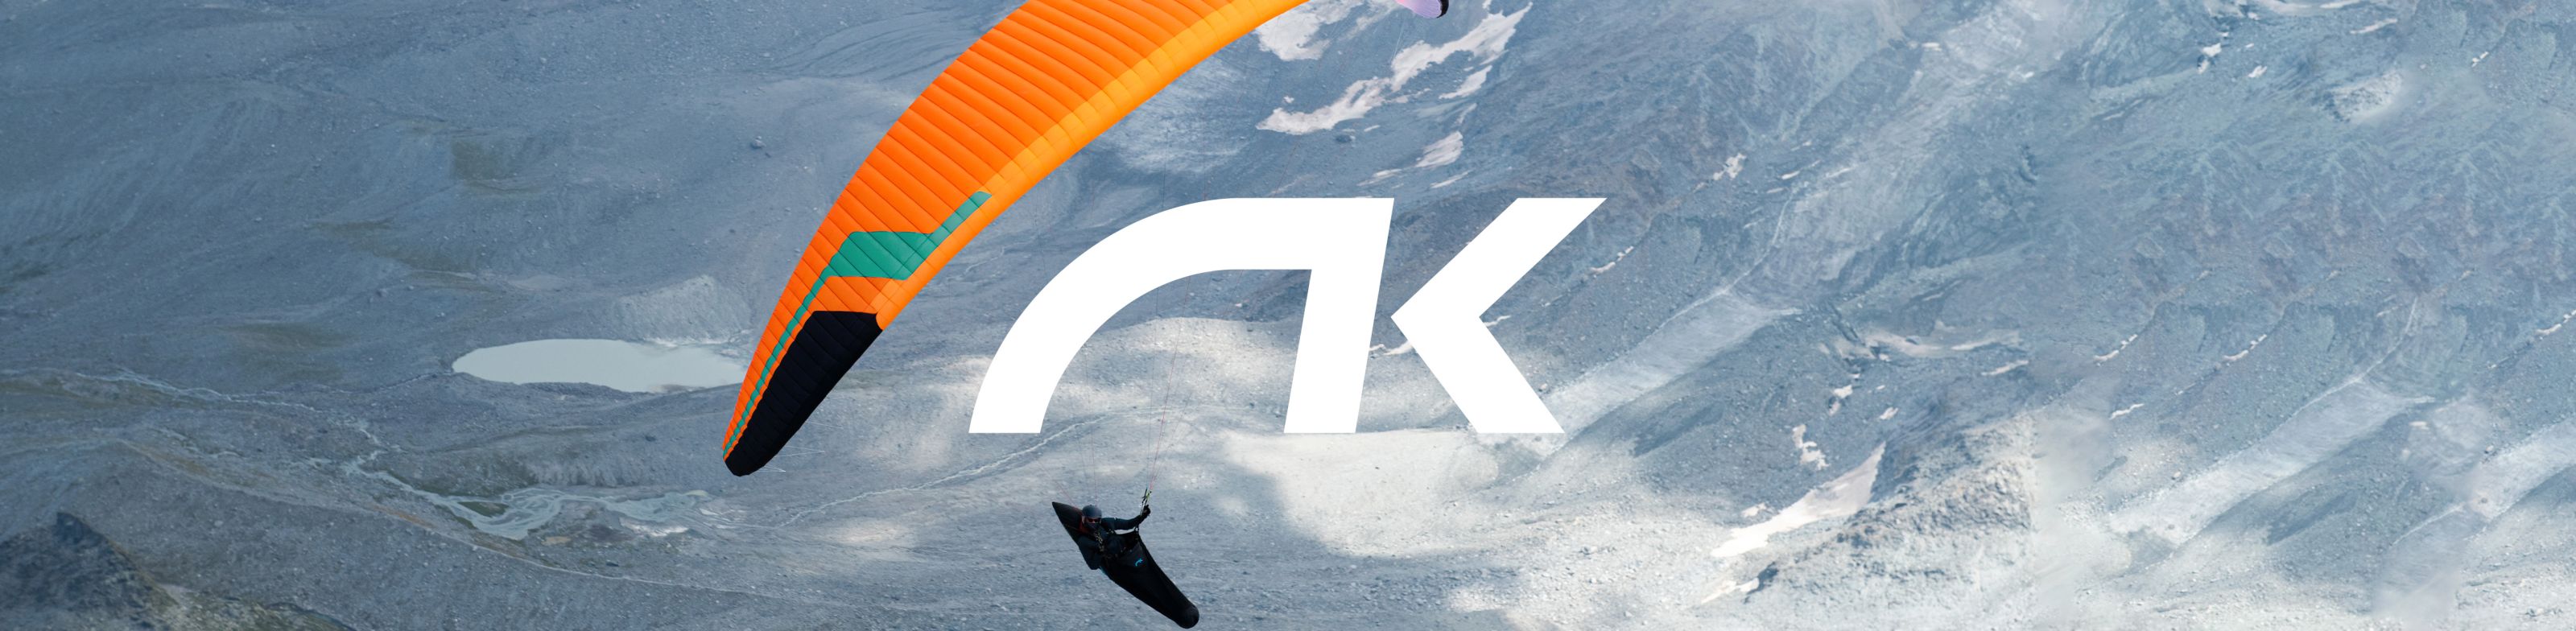 Niviuk Paragliders - new look and new website